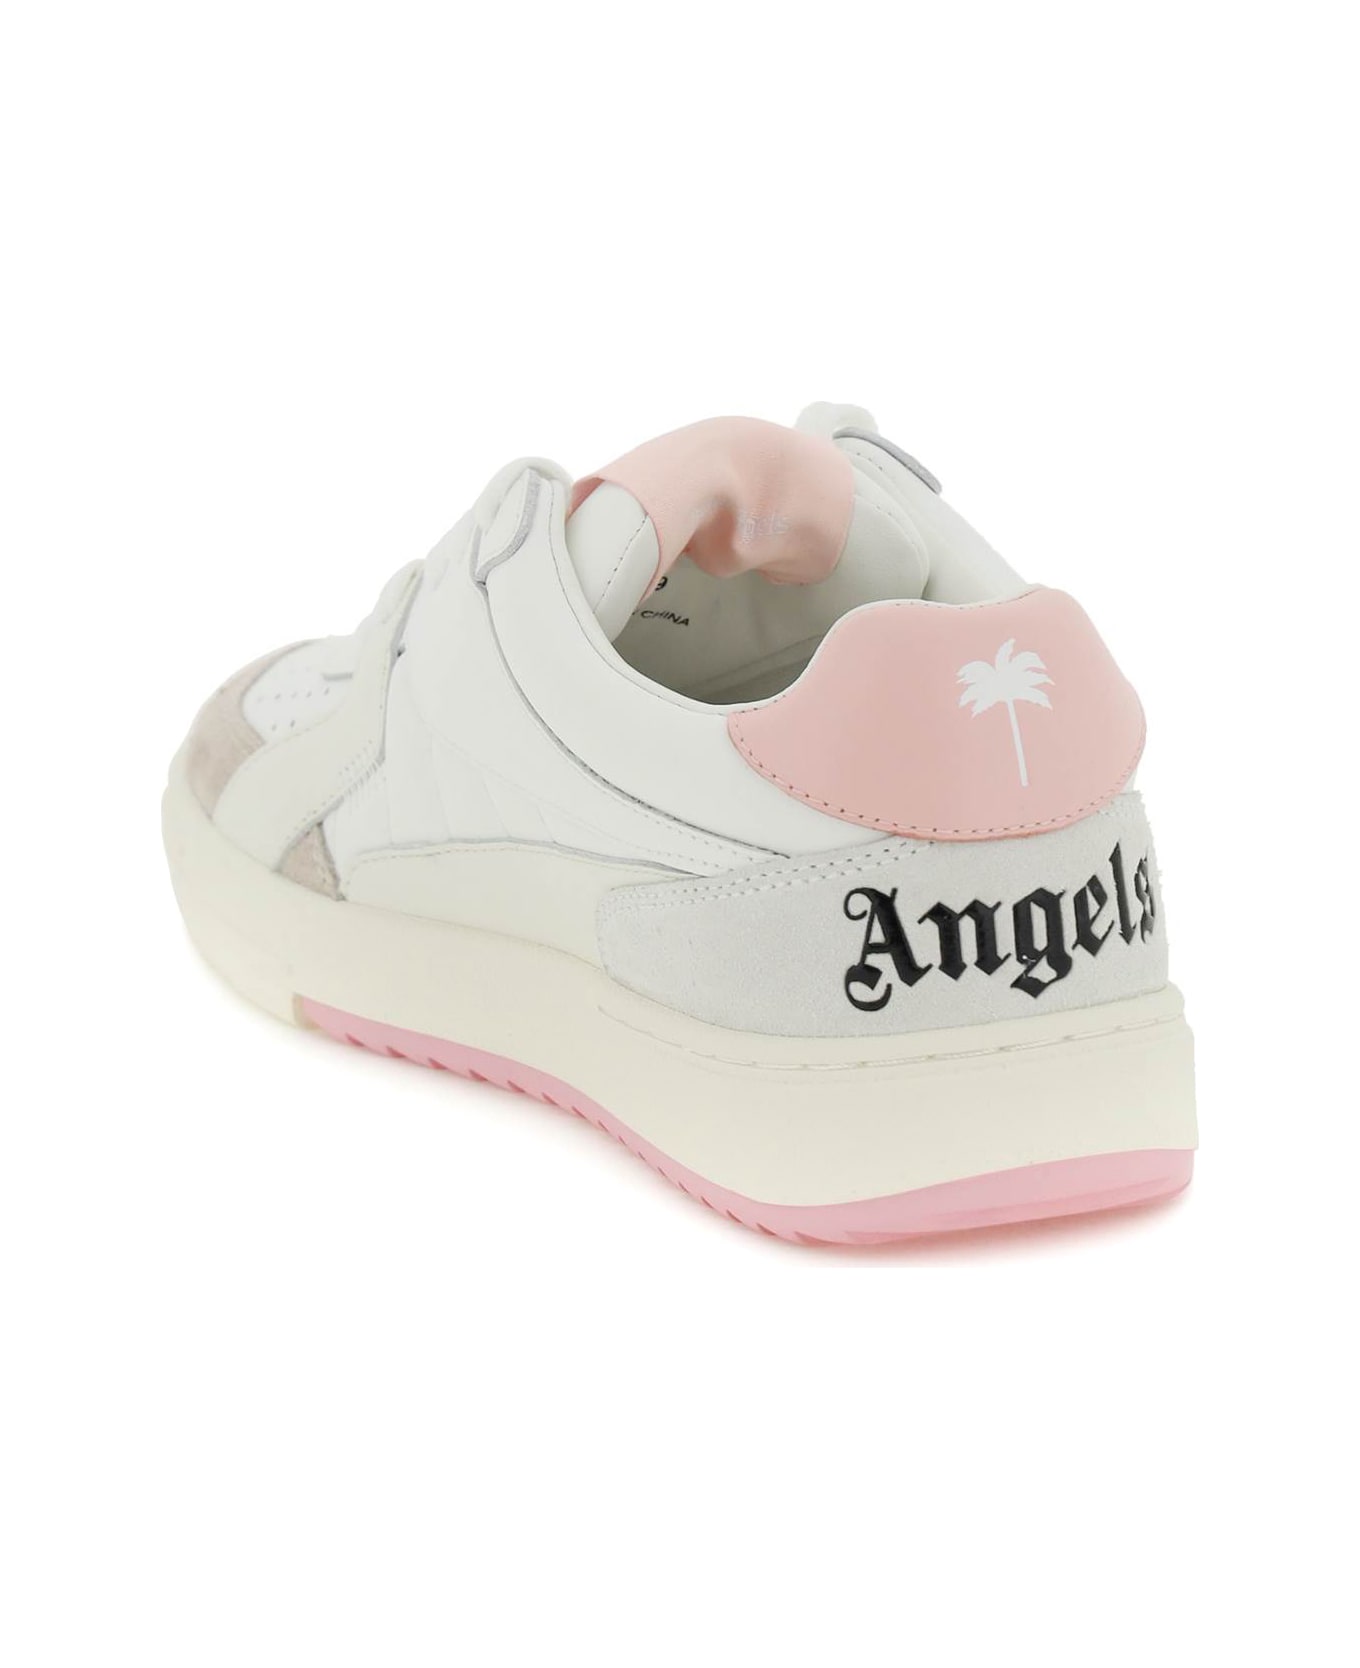 Palm Angels Palm University Sneakers - WHITE PINK (White) スニーカー